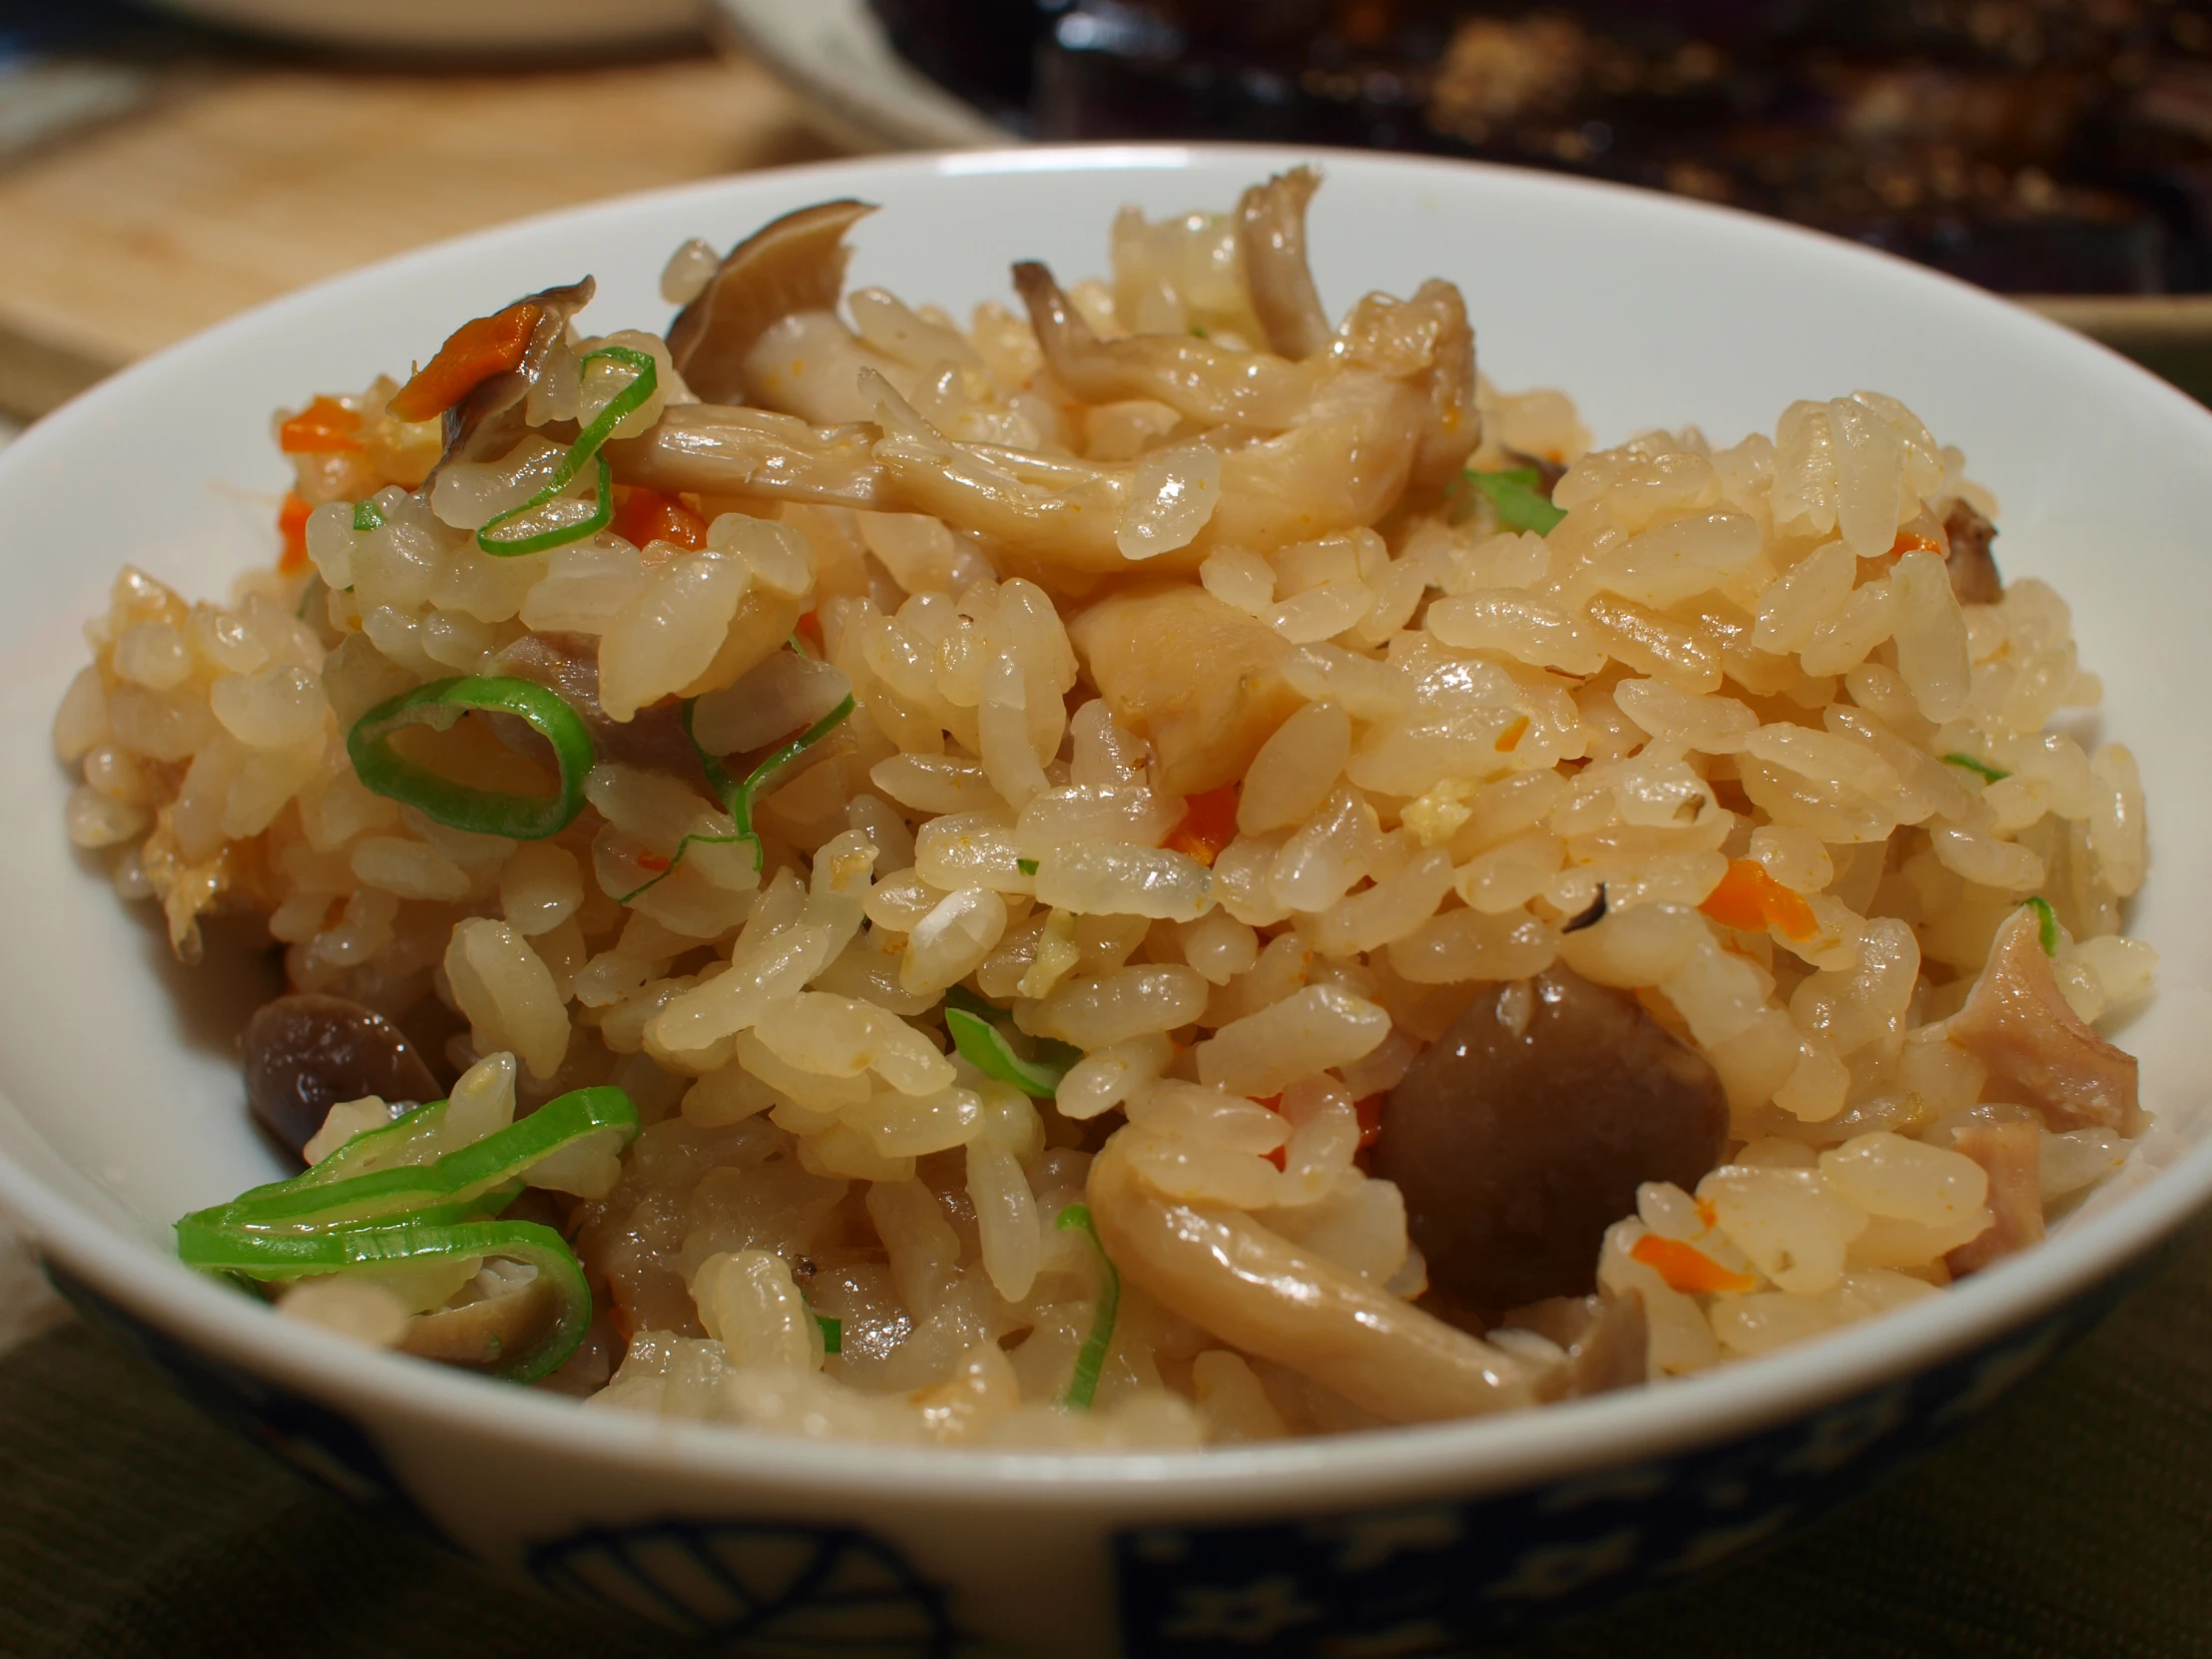 there are a small bowl with rice and mushrooms in it